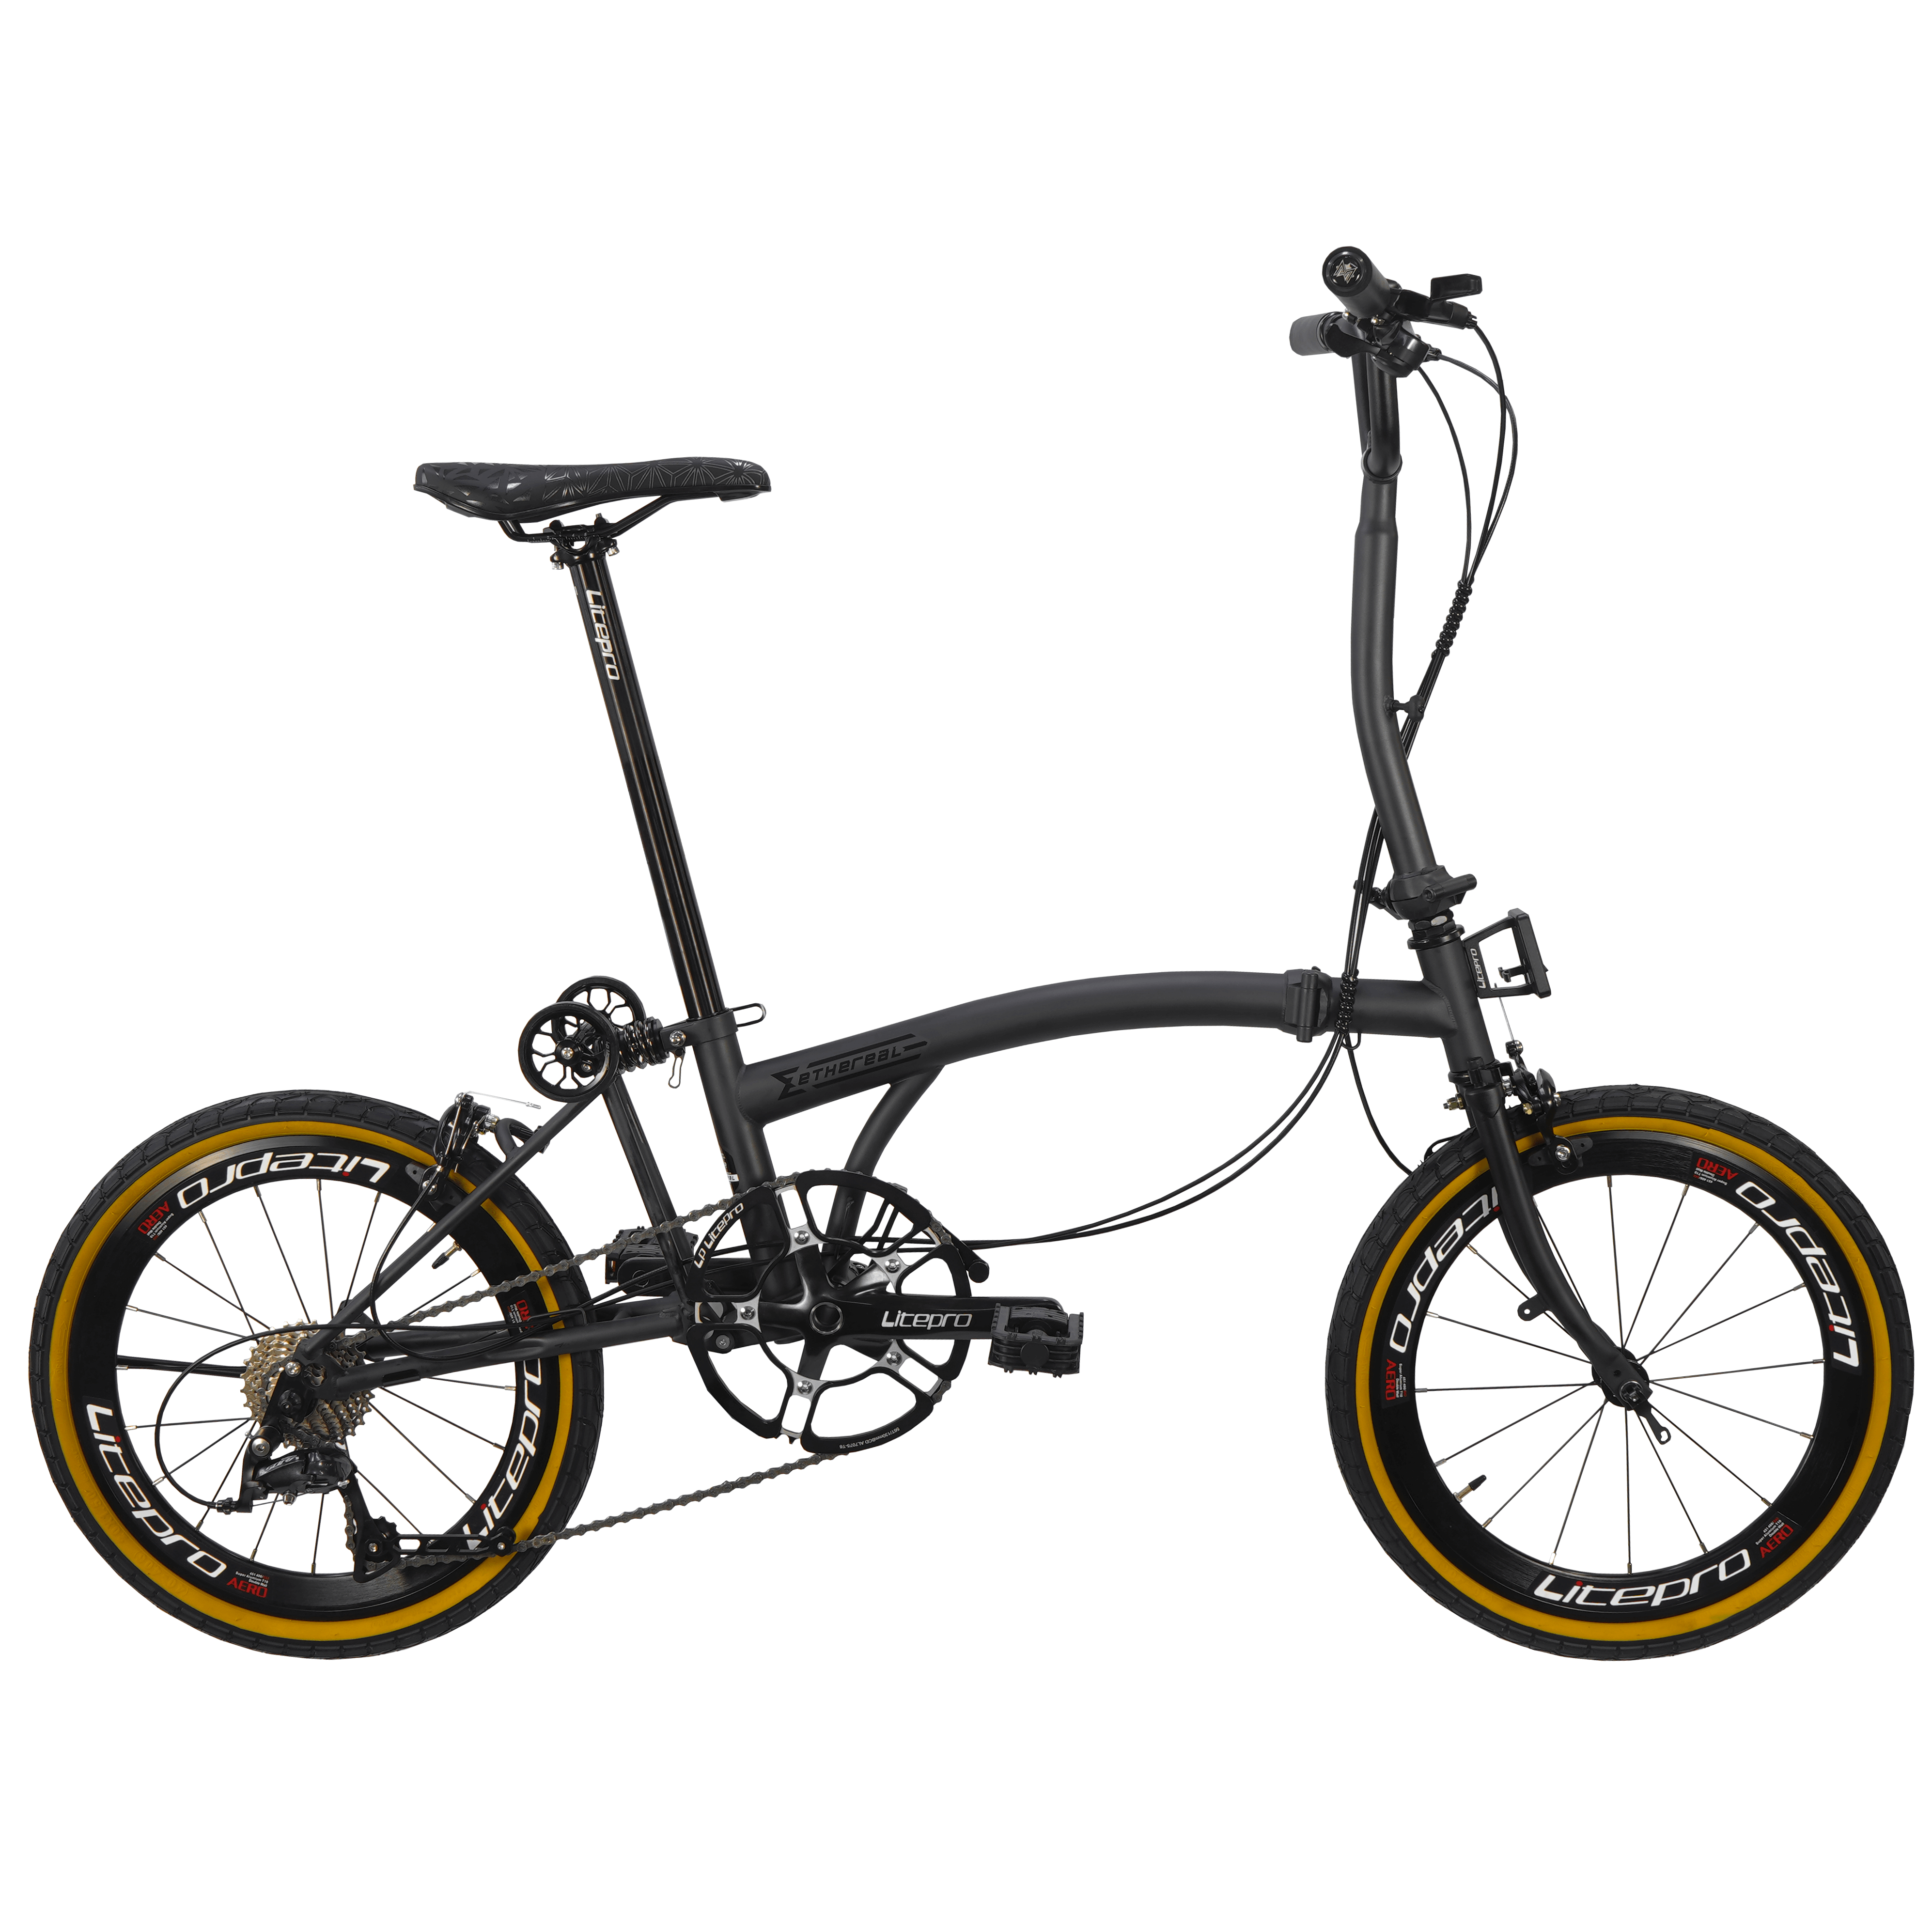 Ethereal G20 Trifold Bicycle - 20 Inch | Compact & Efficient | The Bike Atrium